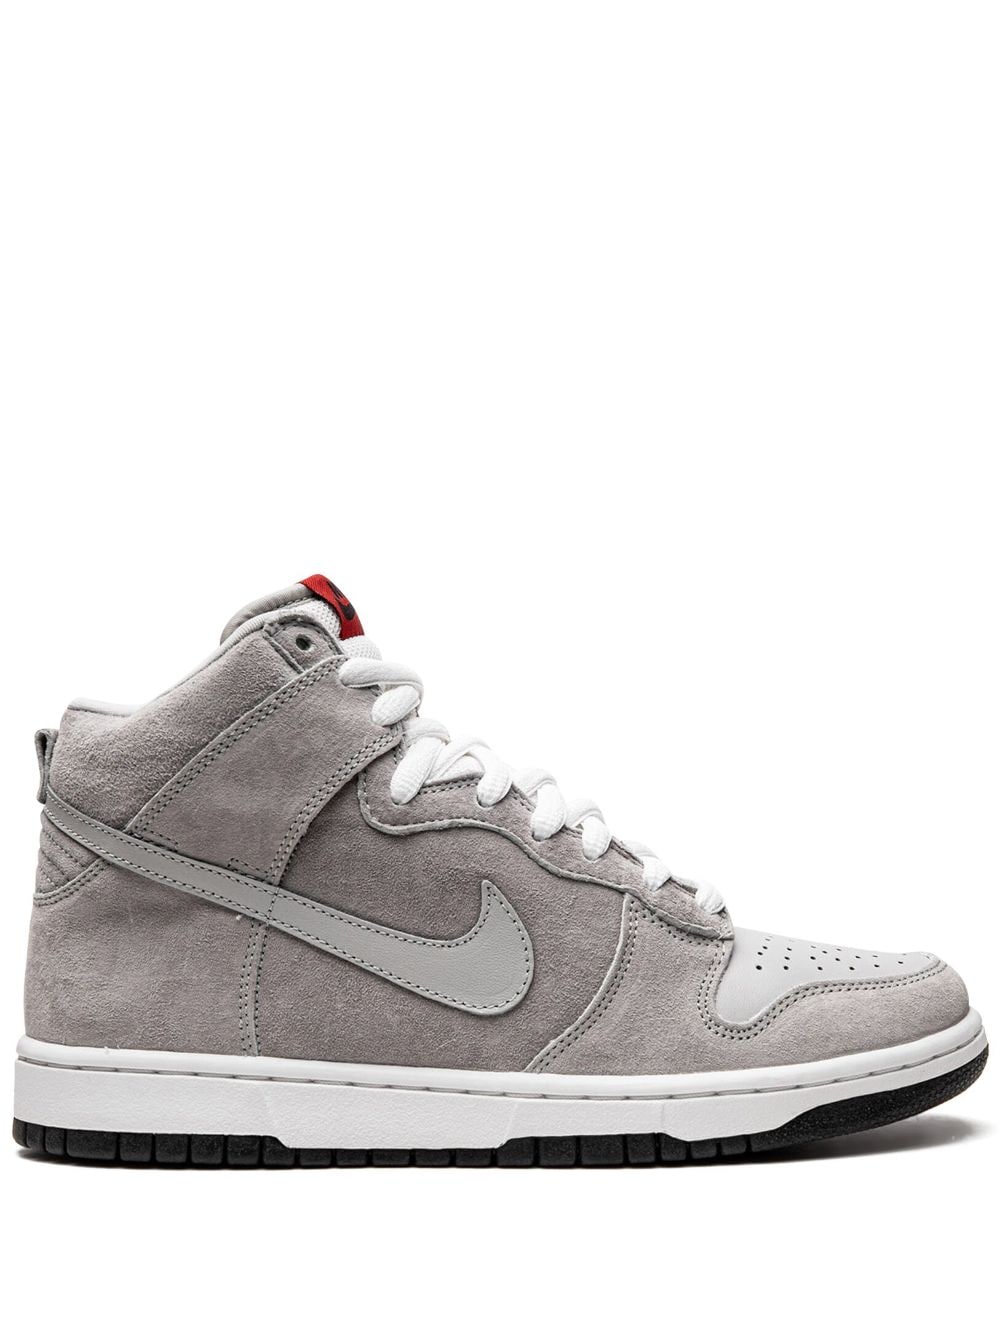 Nike Dunk High Pro Sb Trainers In Grey